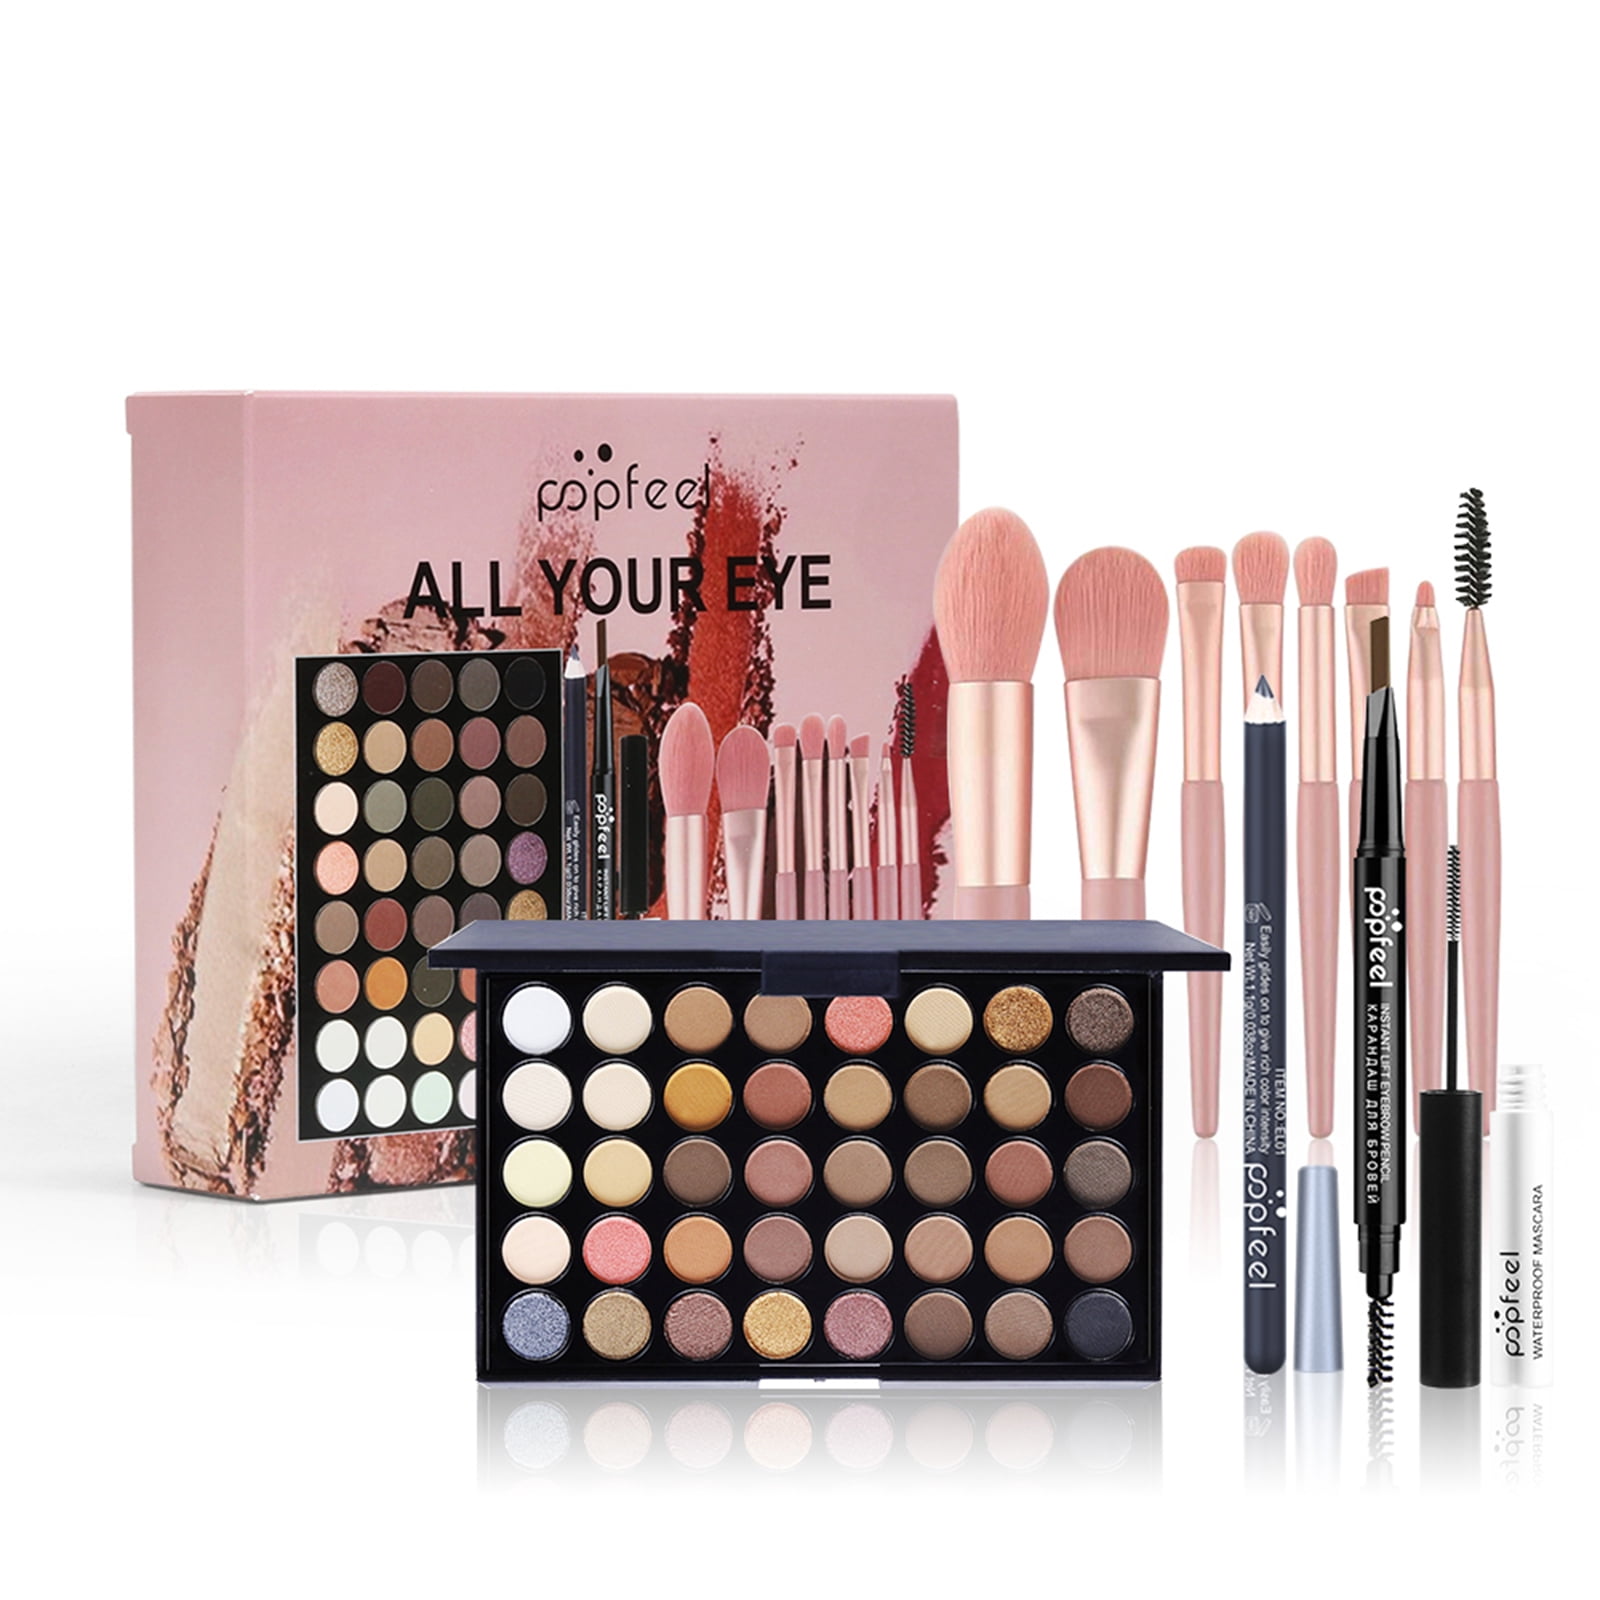 Shany Holiday Surprise - Exclusive All in One Makeup Bundle - Includes Pro Makeup Brush Set, Eyeshadow Palette ,Makeup Set or Lipgloss